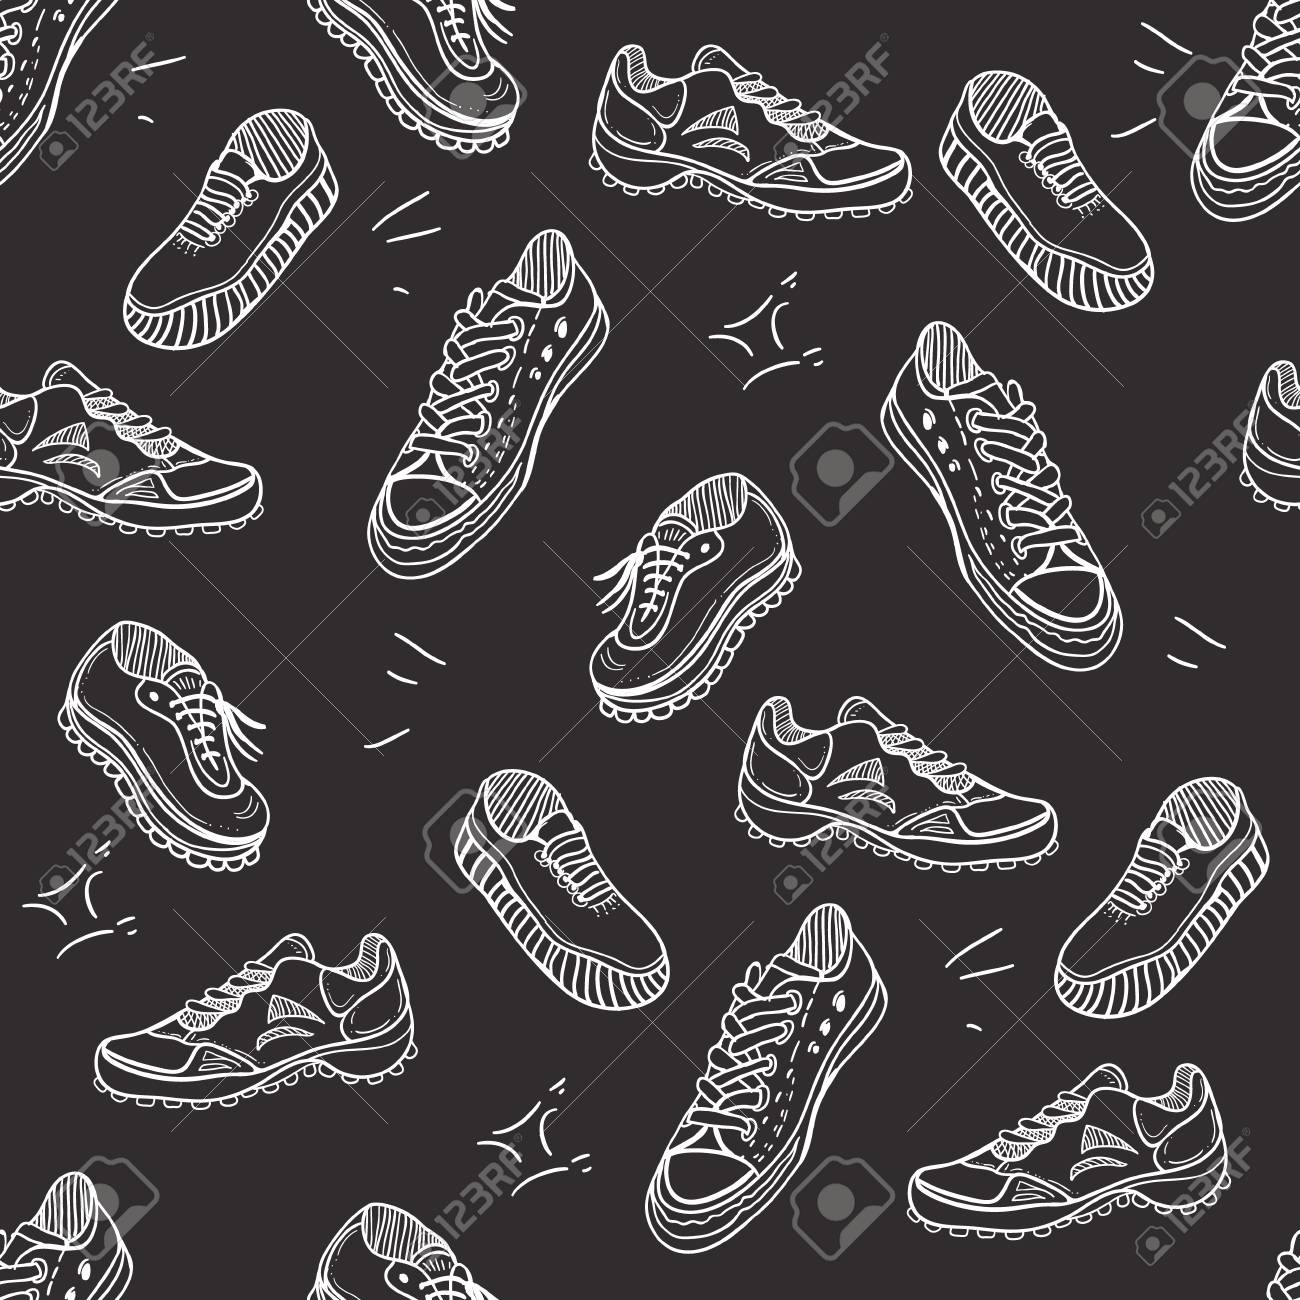 Boots Doodle Pattern Background With Shoes Sneakers